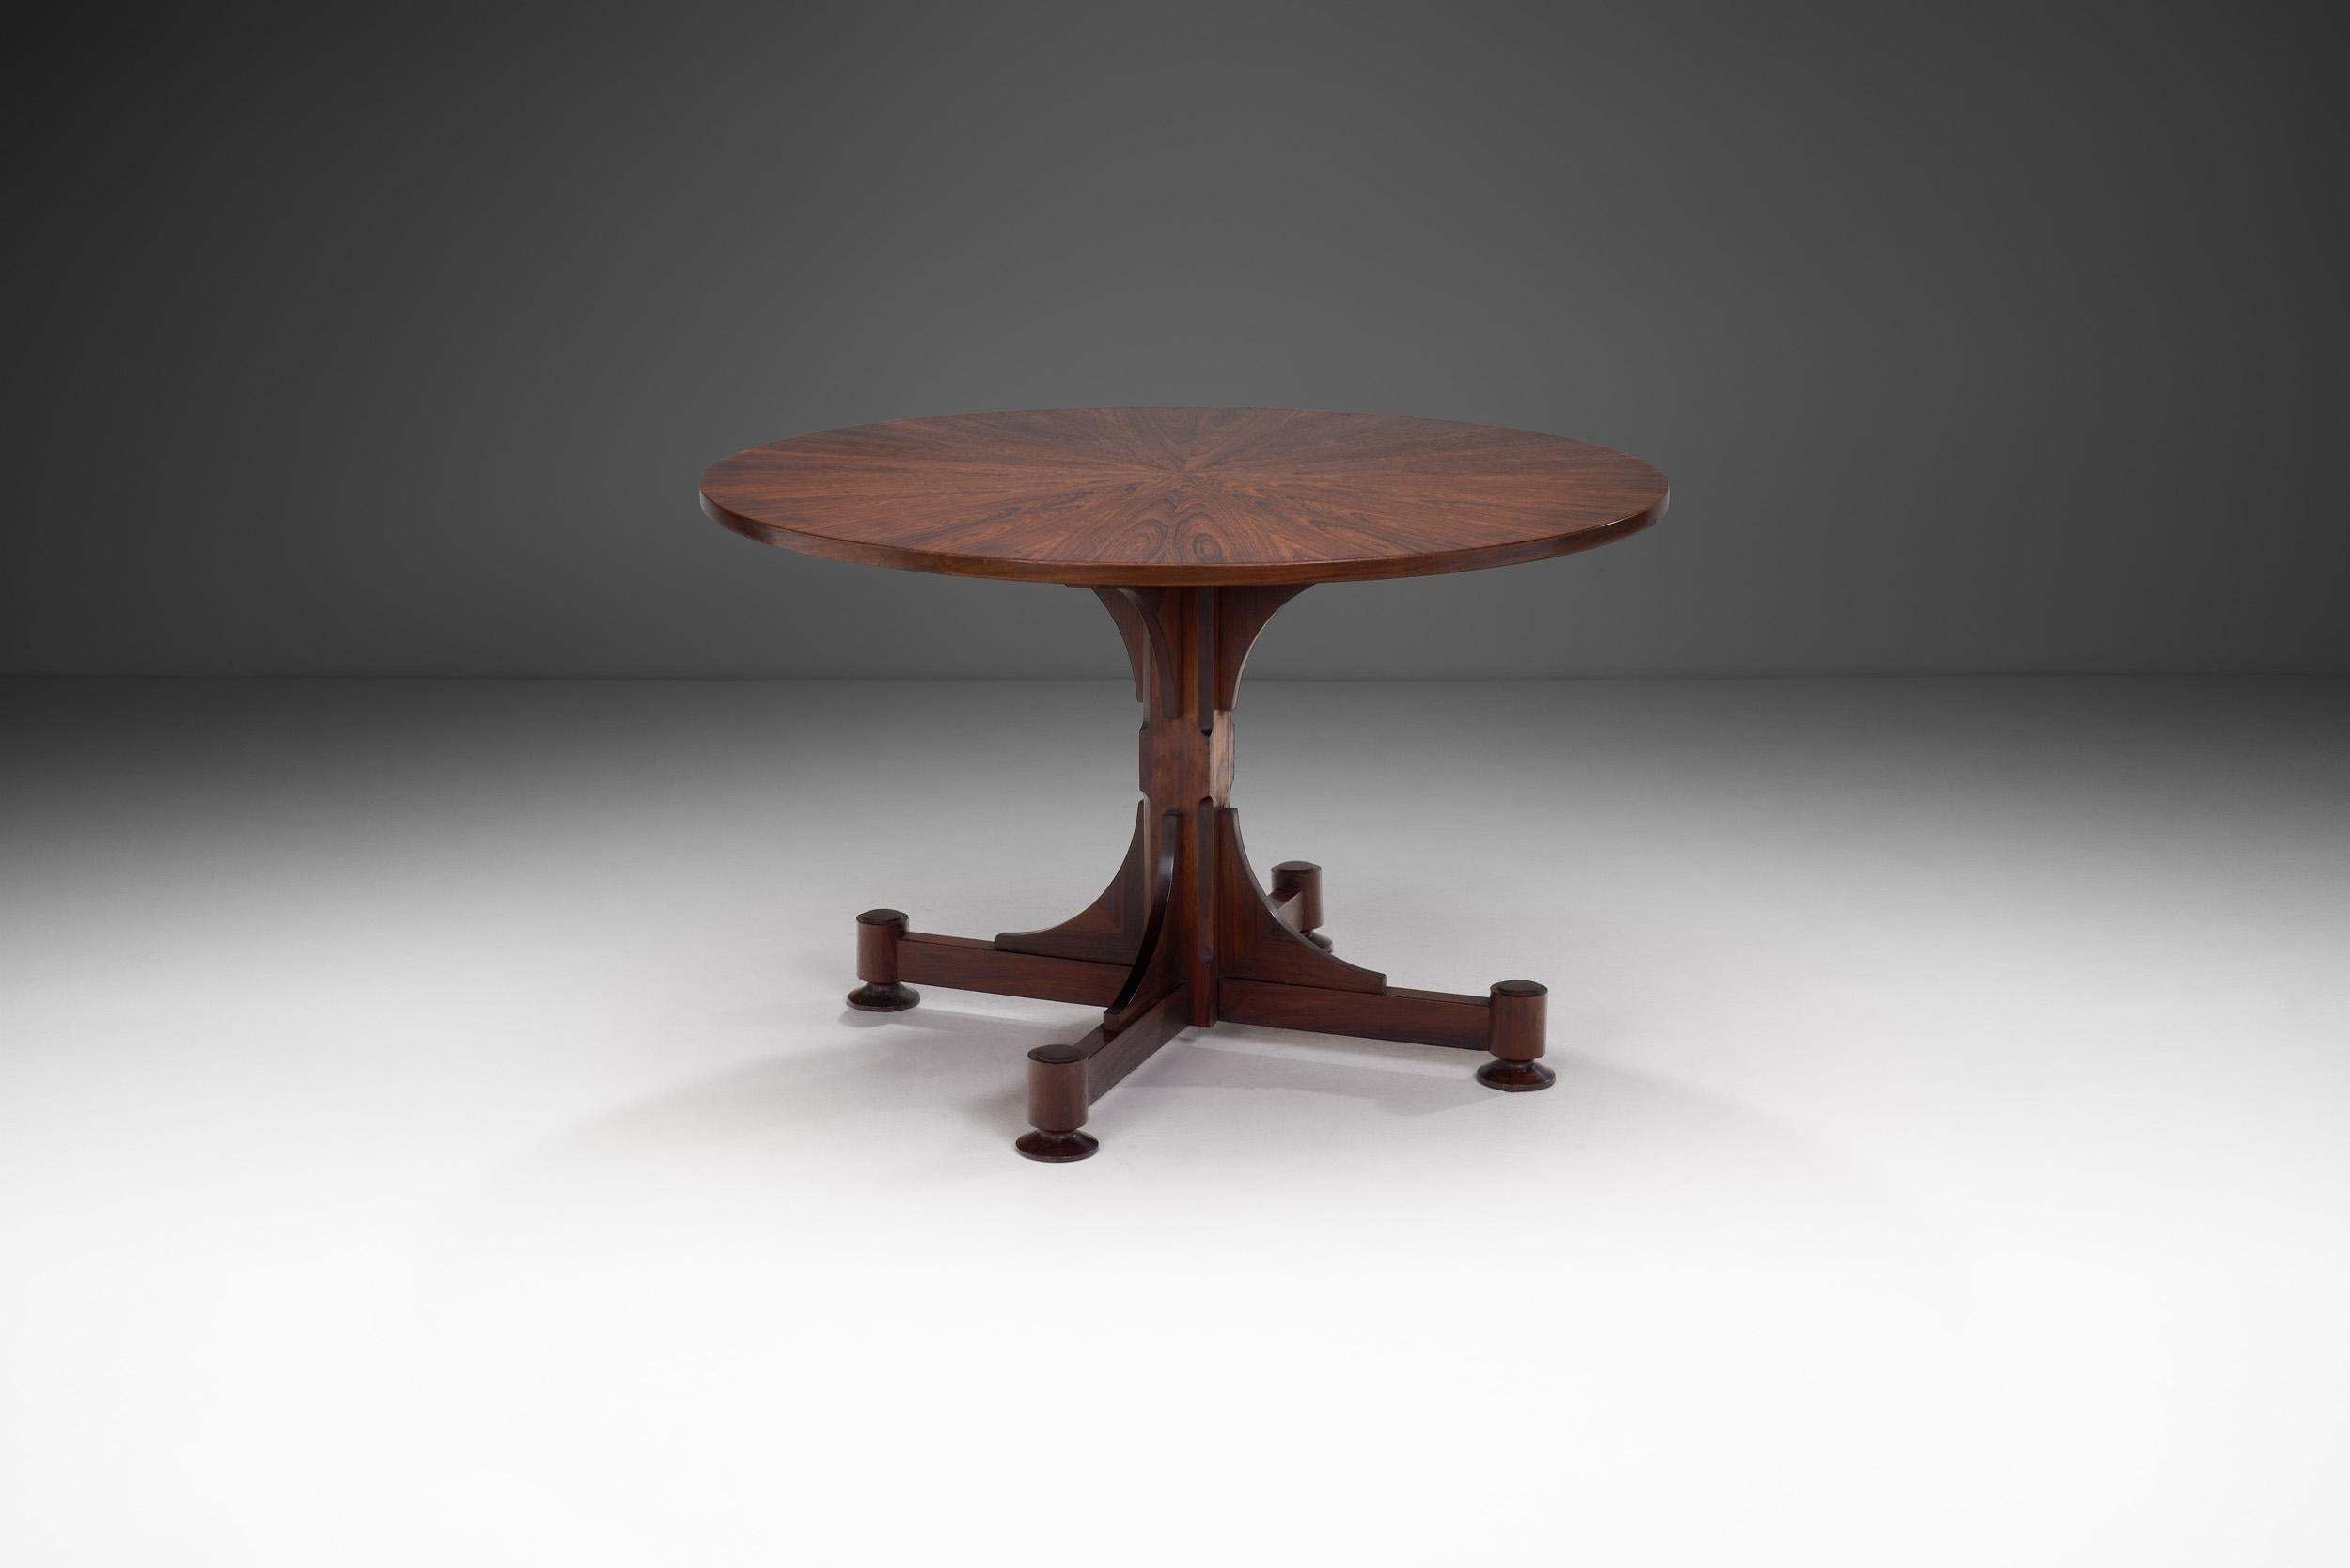 With its beautiful column base, this dining table has an aesthetic that is historic and modern at the same time. The different carved shapes of the wood on the column and the impeccable joinery illustrate the originality of the designer, Gianni